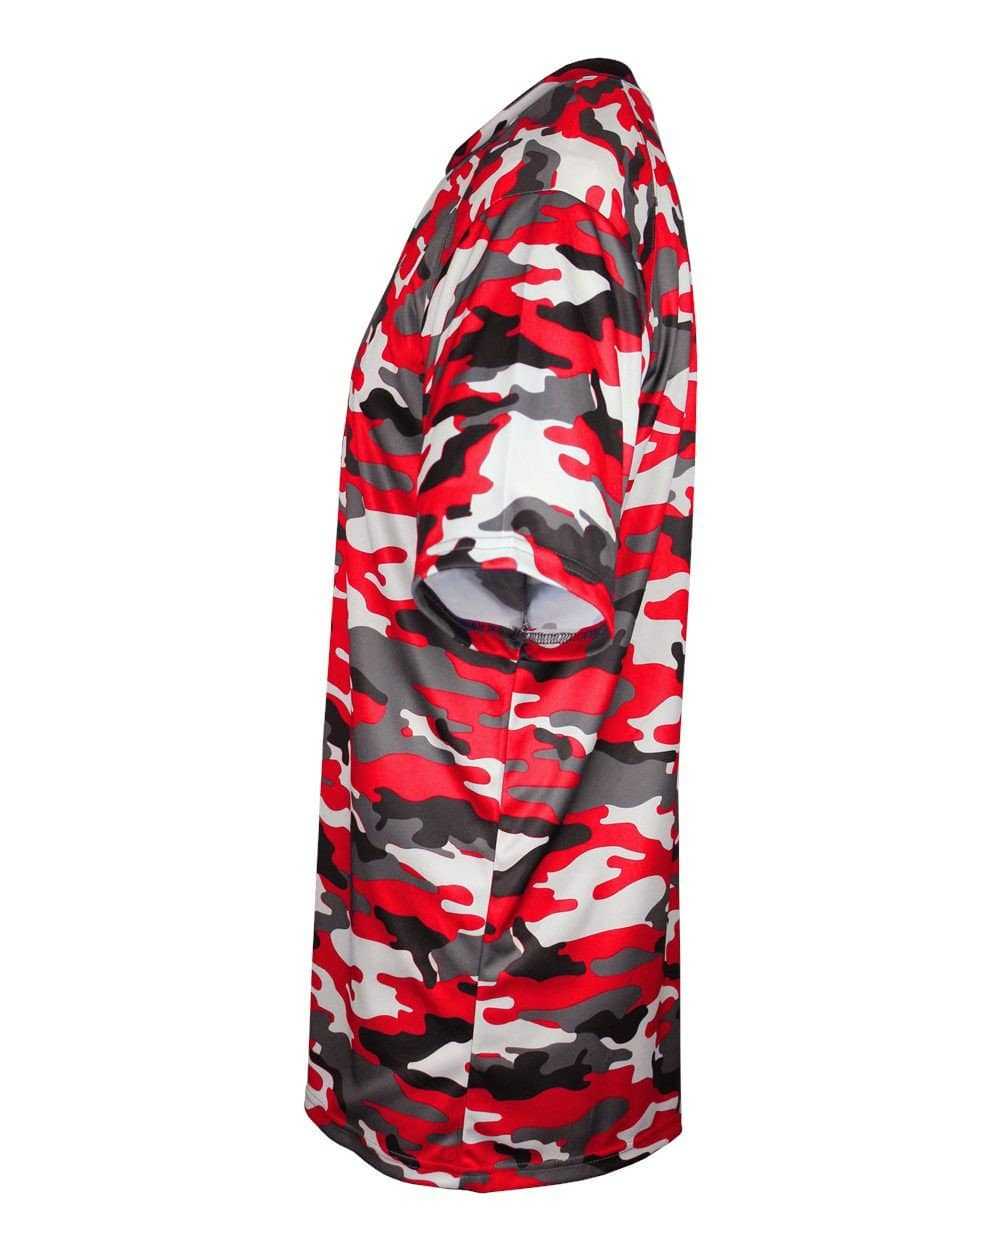 Badger Sport 2181 Camo Youth Tee - Red Camo - HIT a Double - 1